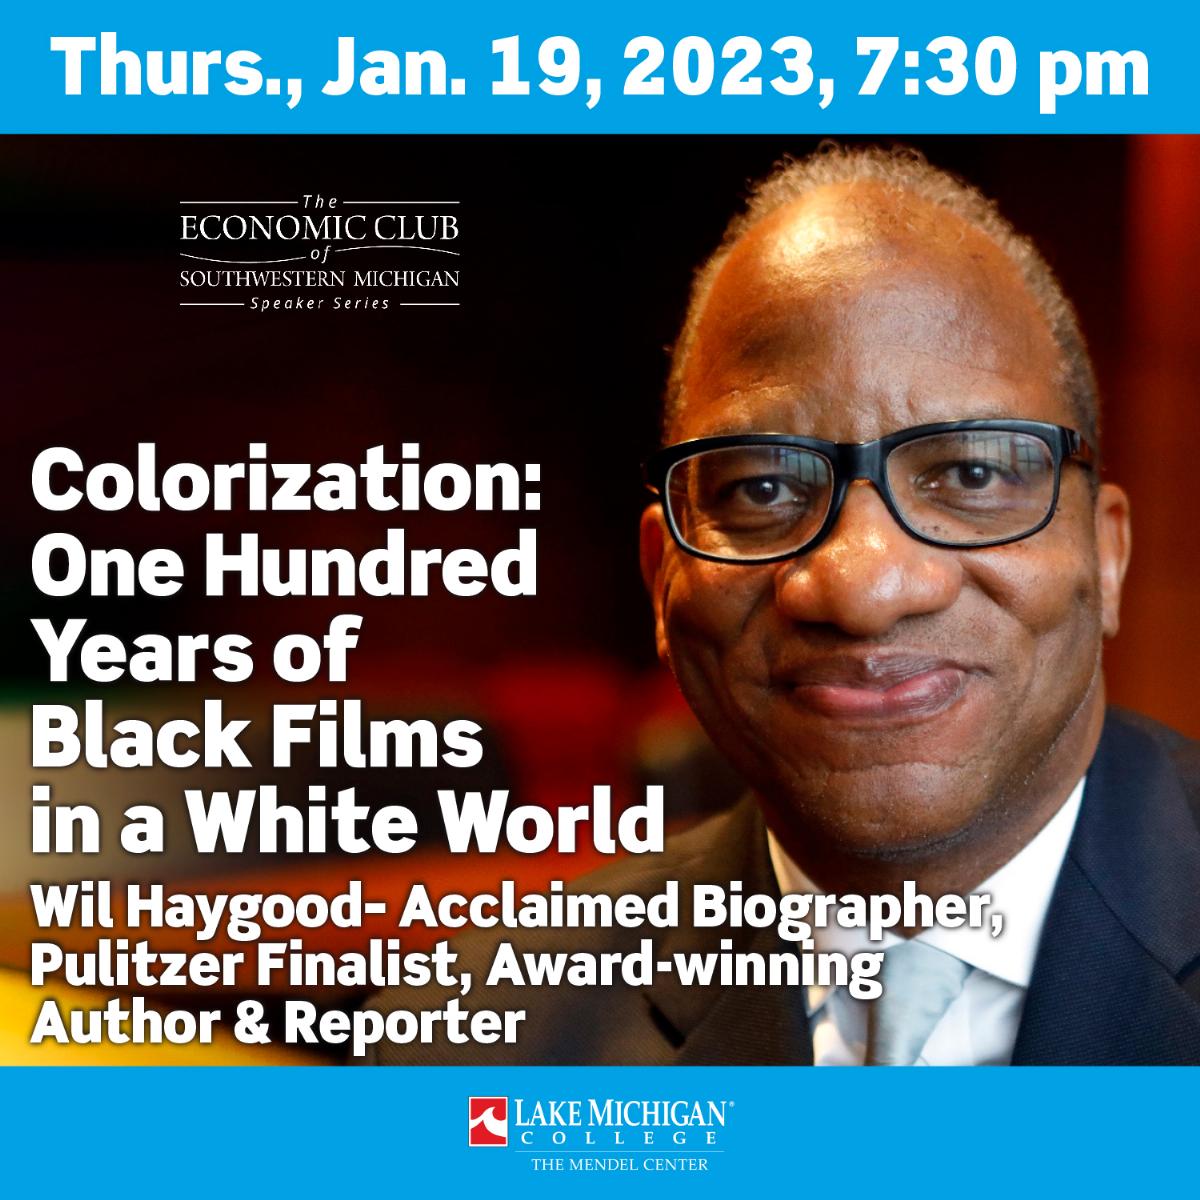 Colorization: One Hundred Years of Black Films in a White World with Wil Haygood, Acclaimed Biographer, Author & Reporter